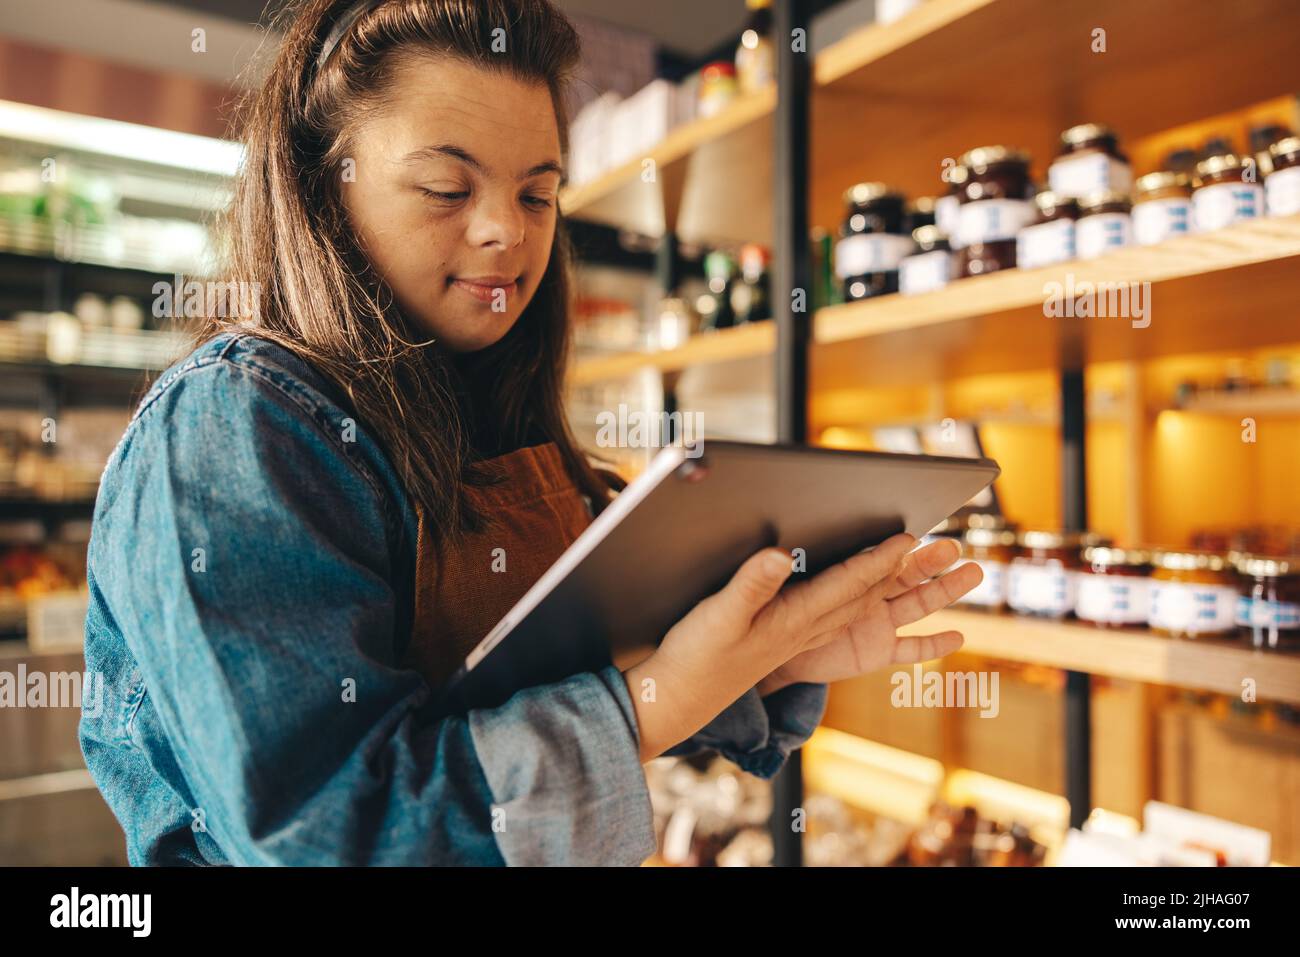 Store employee with Down syndrome taking inventory using a digital tablet. Empowered woman with an intellectual disability working as a shopkeeper in Stock Photo